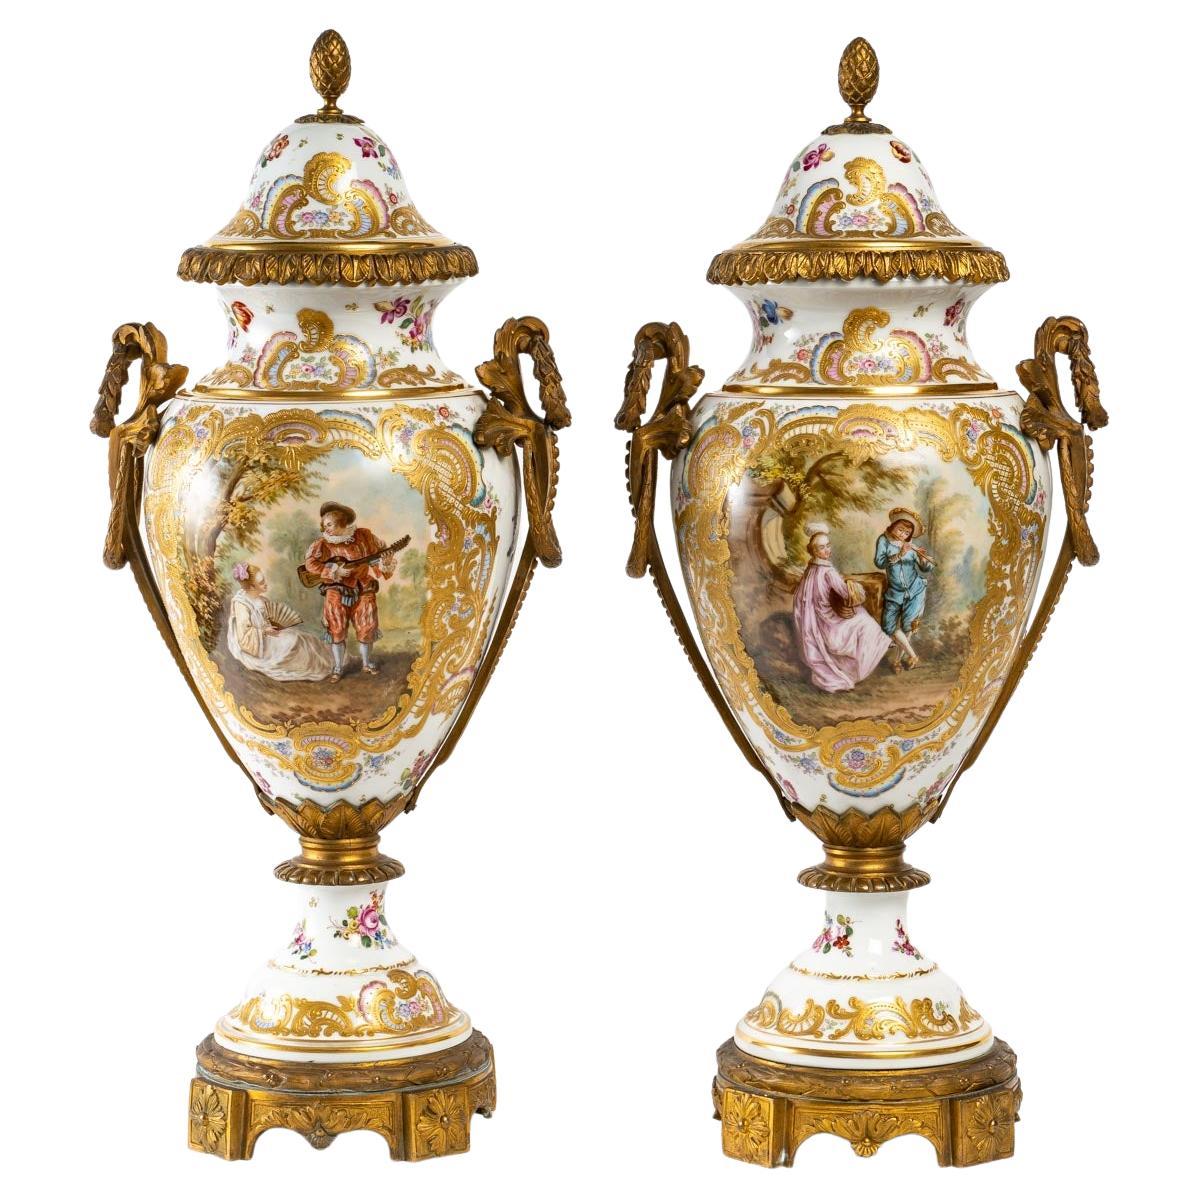 Pair of Sèvres porcelain covered vases, 19th century